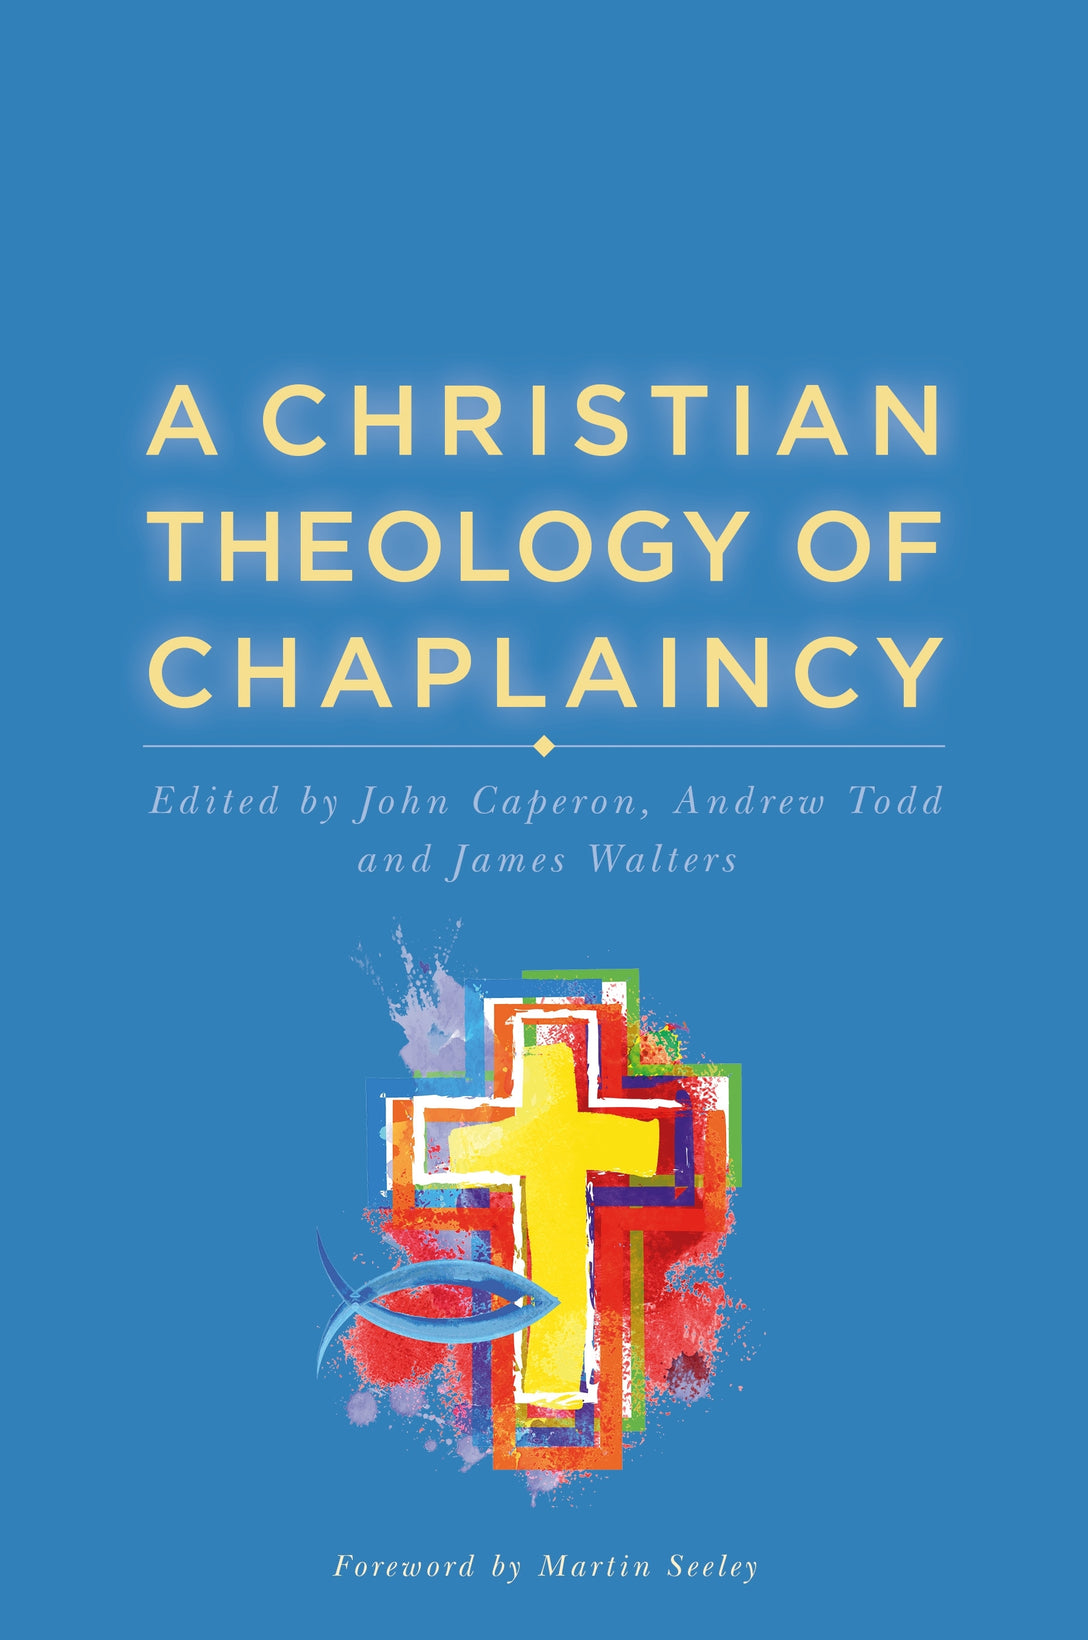 A Christian Theology of Chaplaincy by John Caperon, Andrew Todd, James Walters, Martin Seeley, No Author Listed